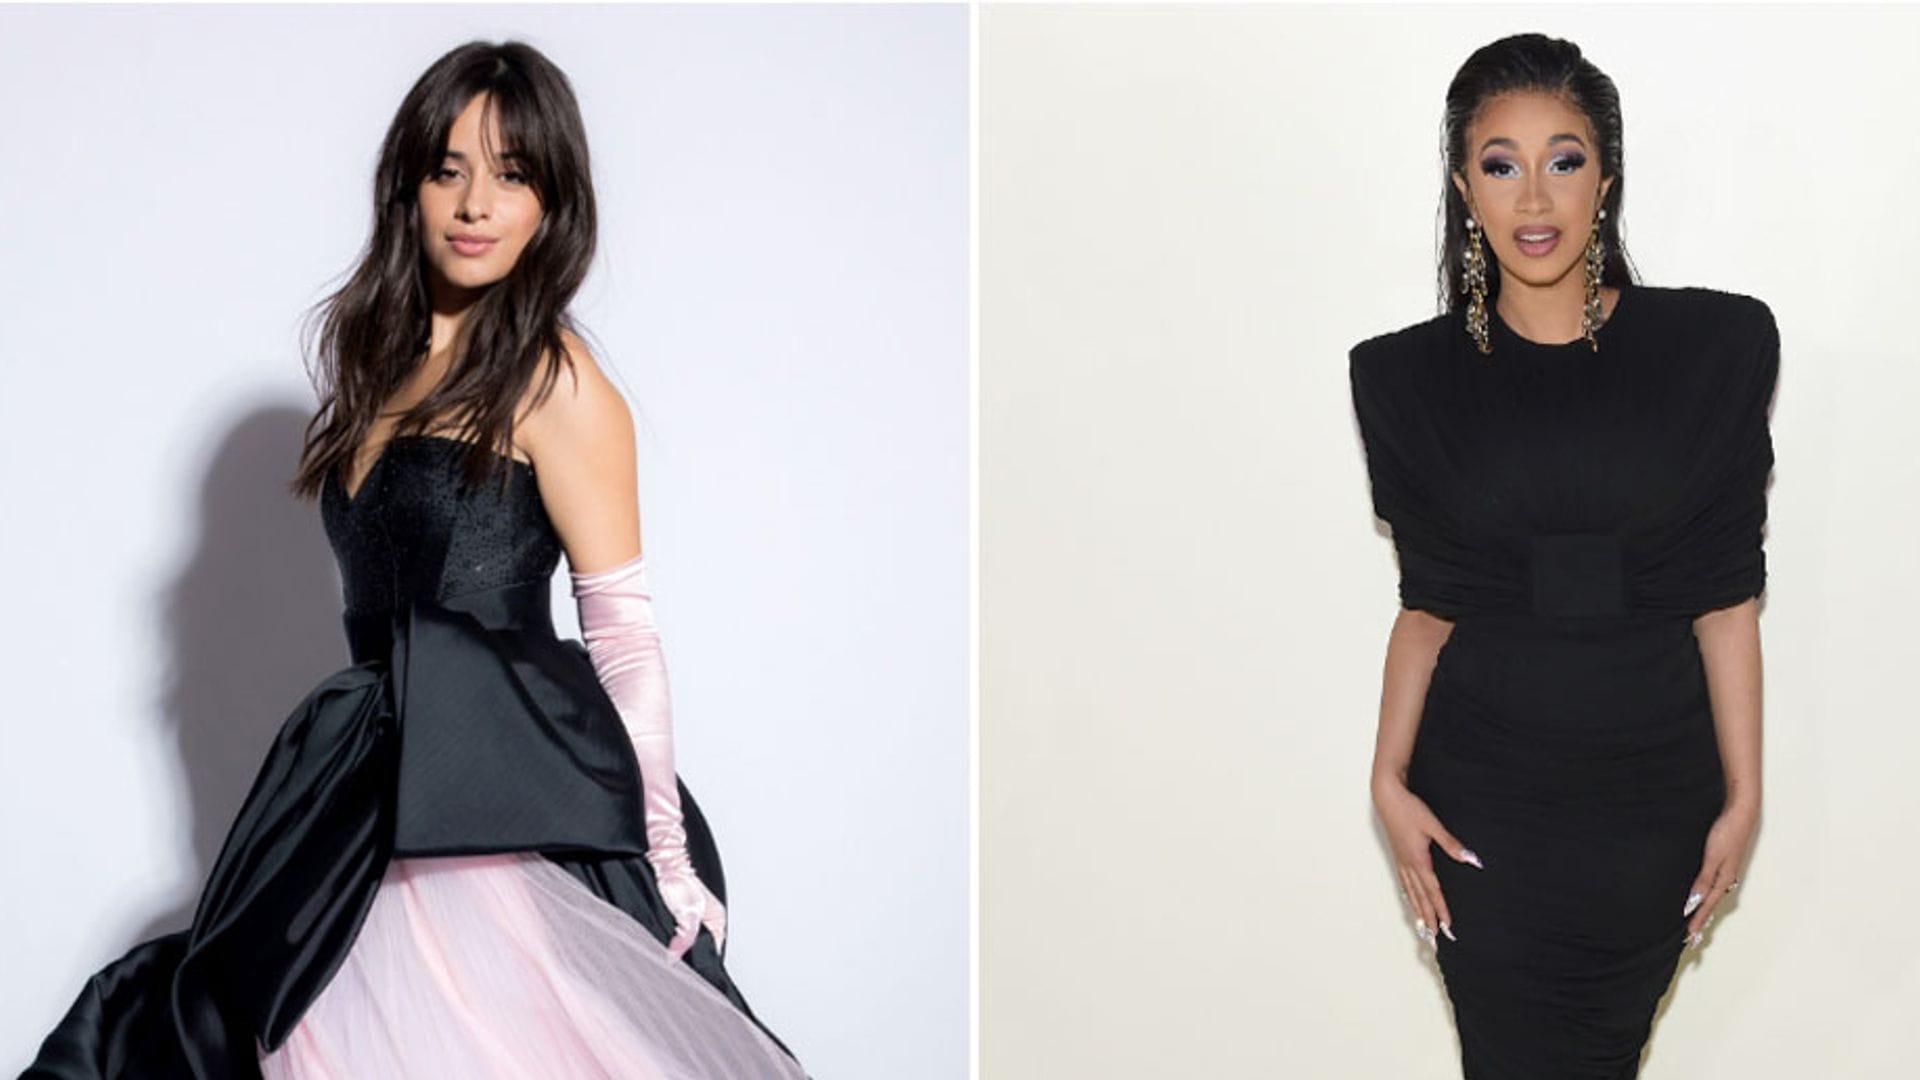 Camila Cabello and Cardi B announced as performers for the 2019 Grammys! See who else made the list